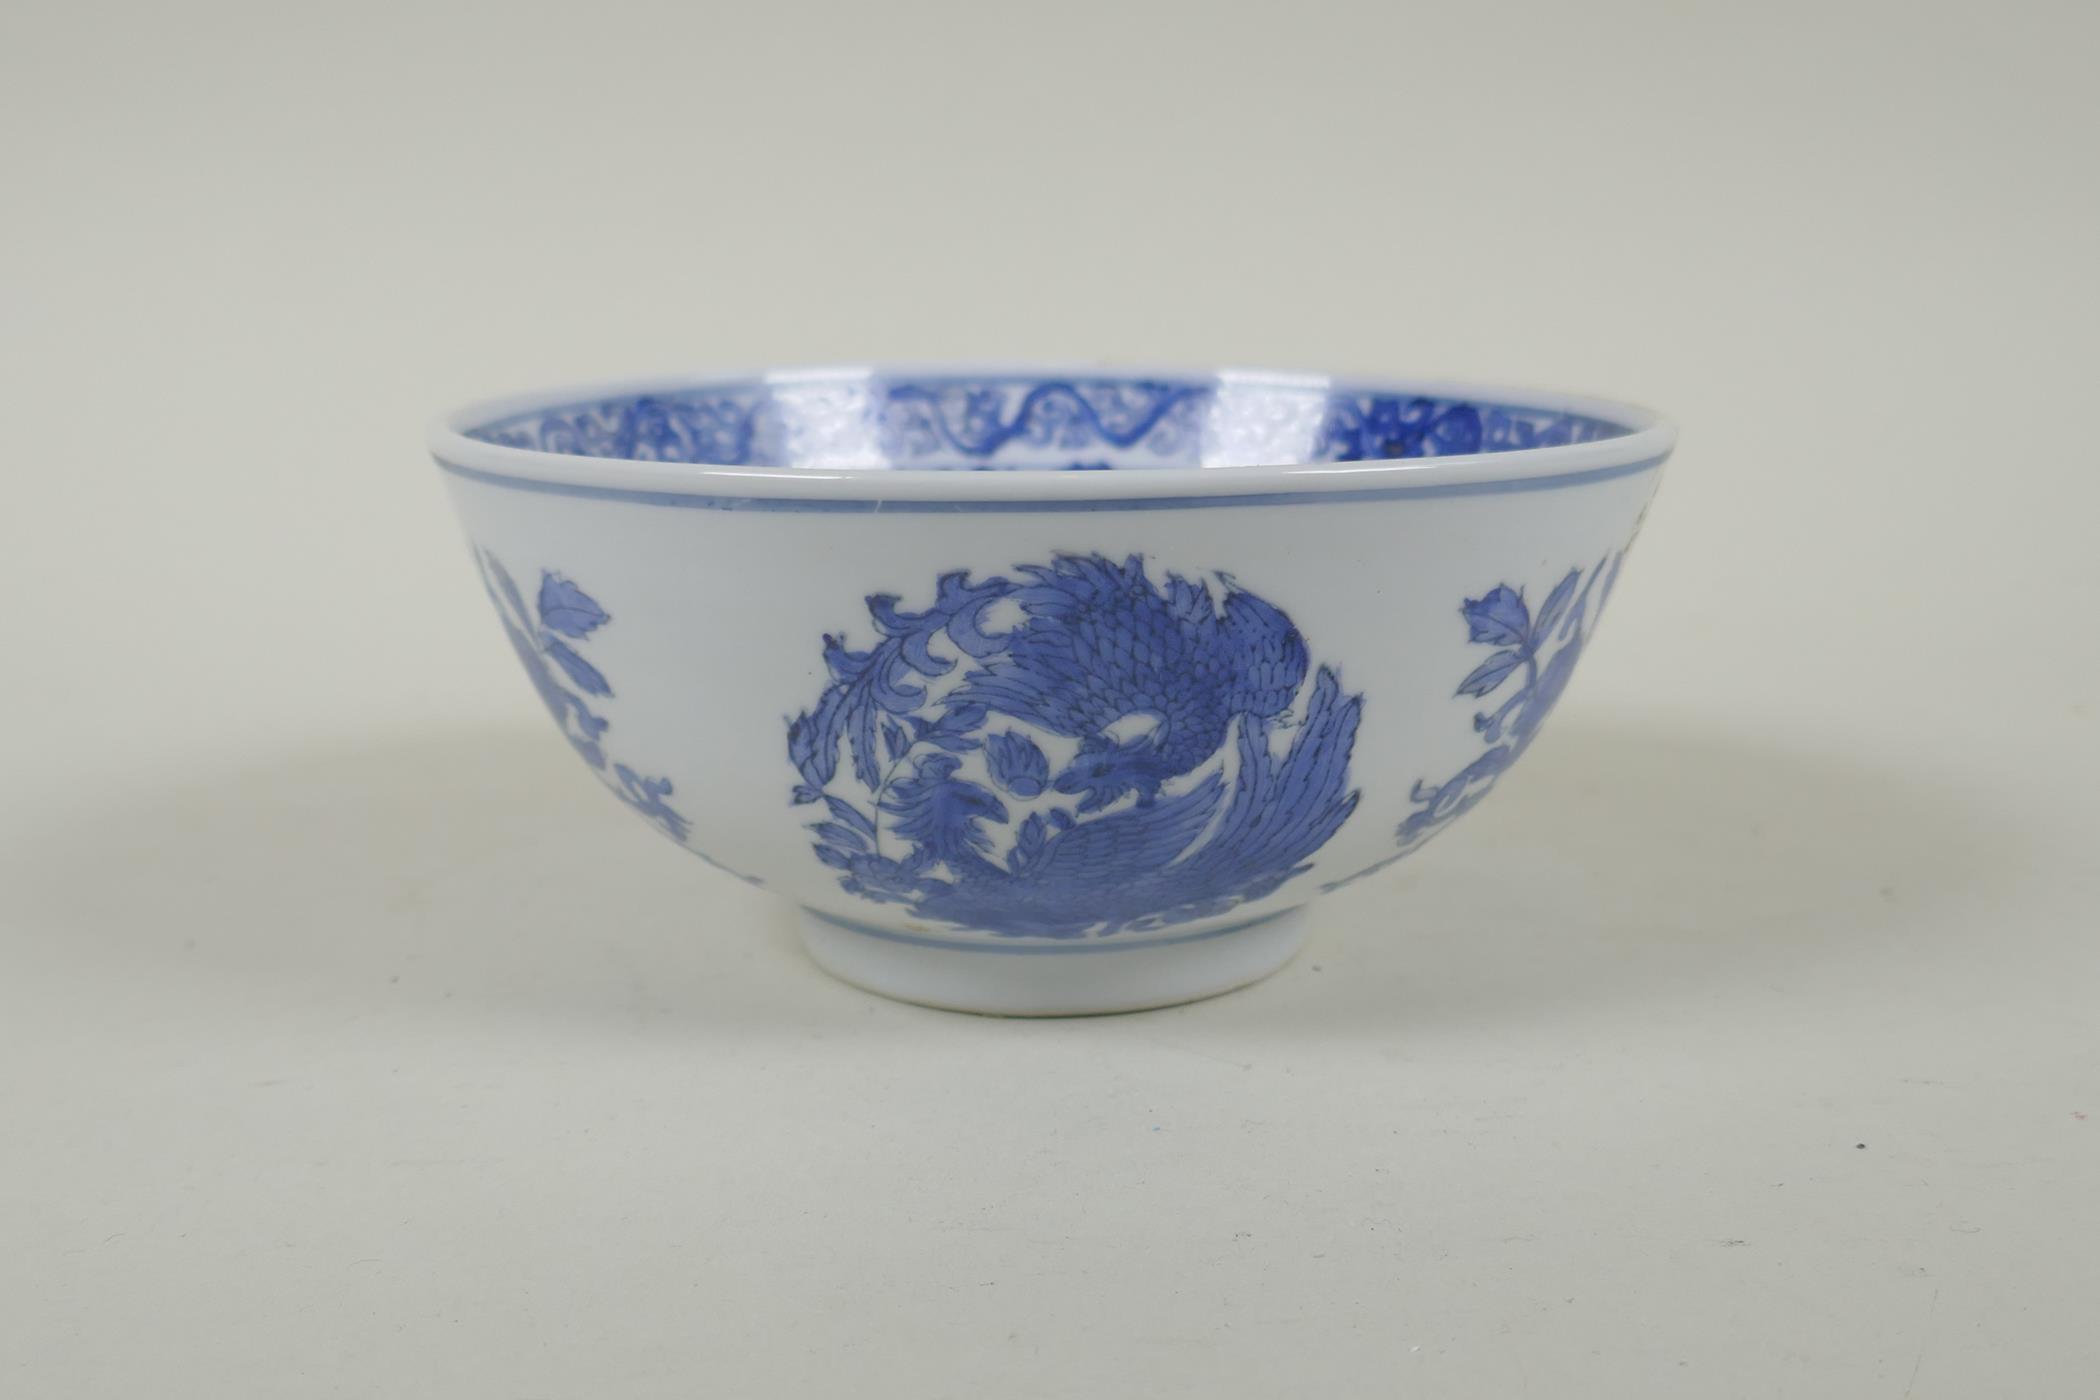 A Chinese blue and white porcelain bowl with phoenix and floral decoration, Qianlong 6 character